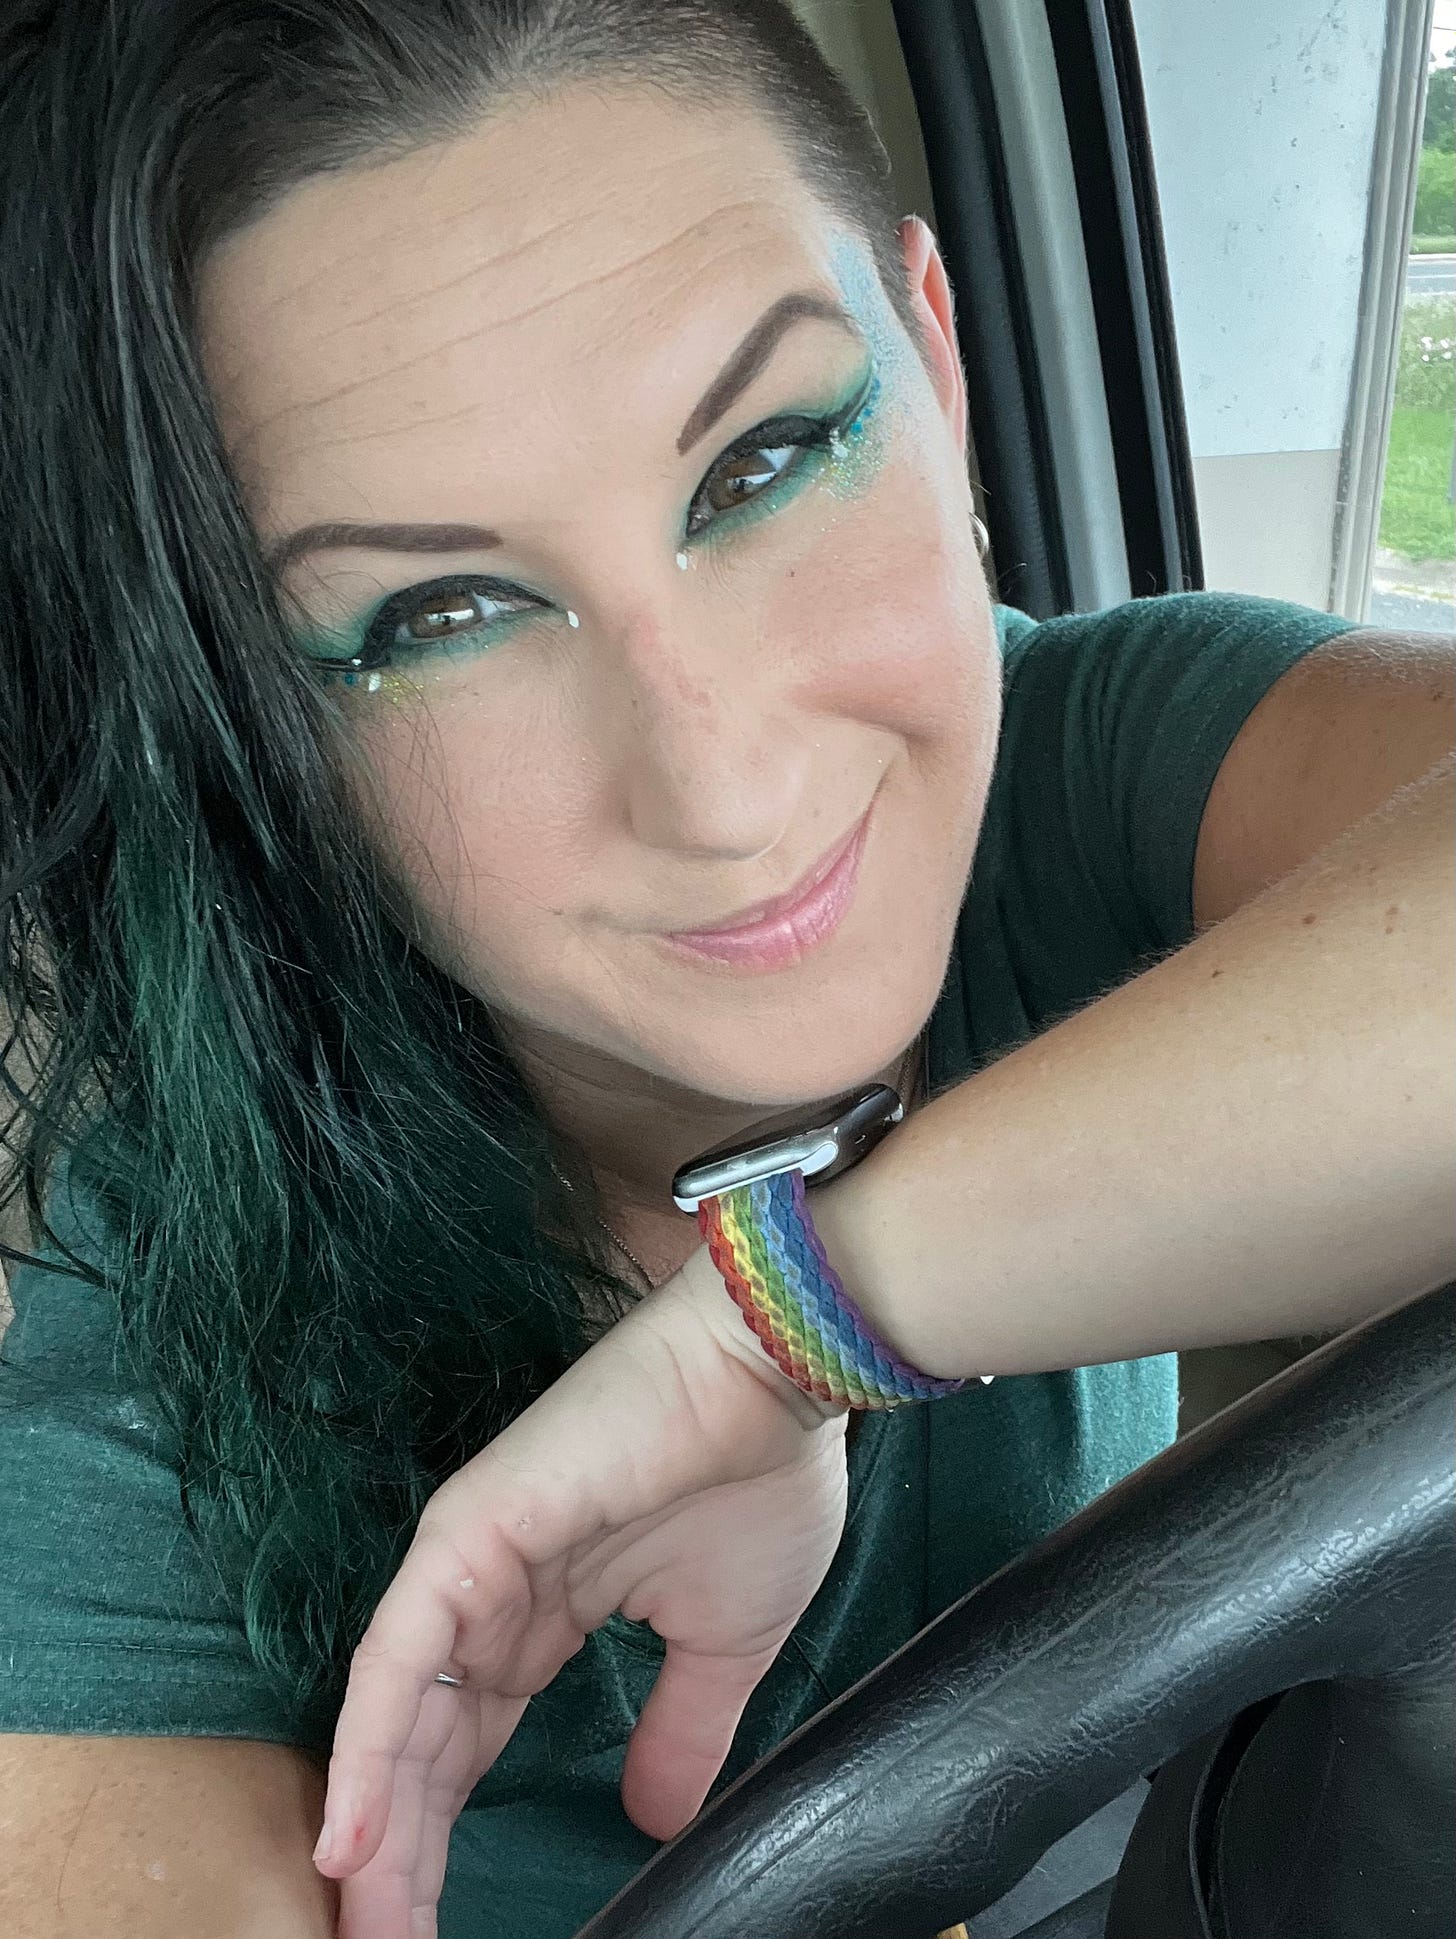 This is a photo of Lyric, dressed in Green for spring. They have bold green, black, and white-winged eyeliner and a green shirt. They are leaning on the RV's steering wheel with their left arm, which has a rainbow watch on it.